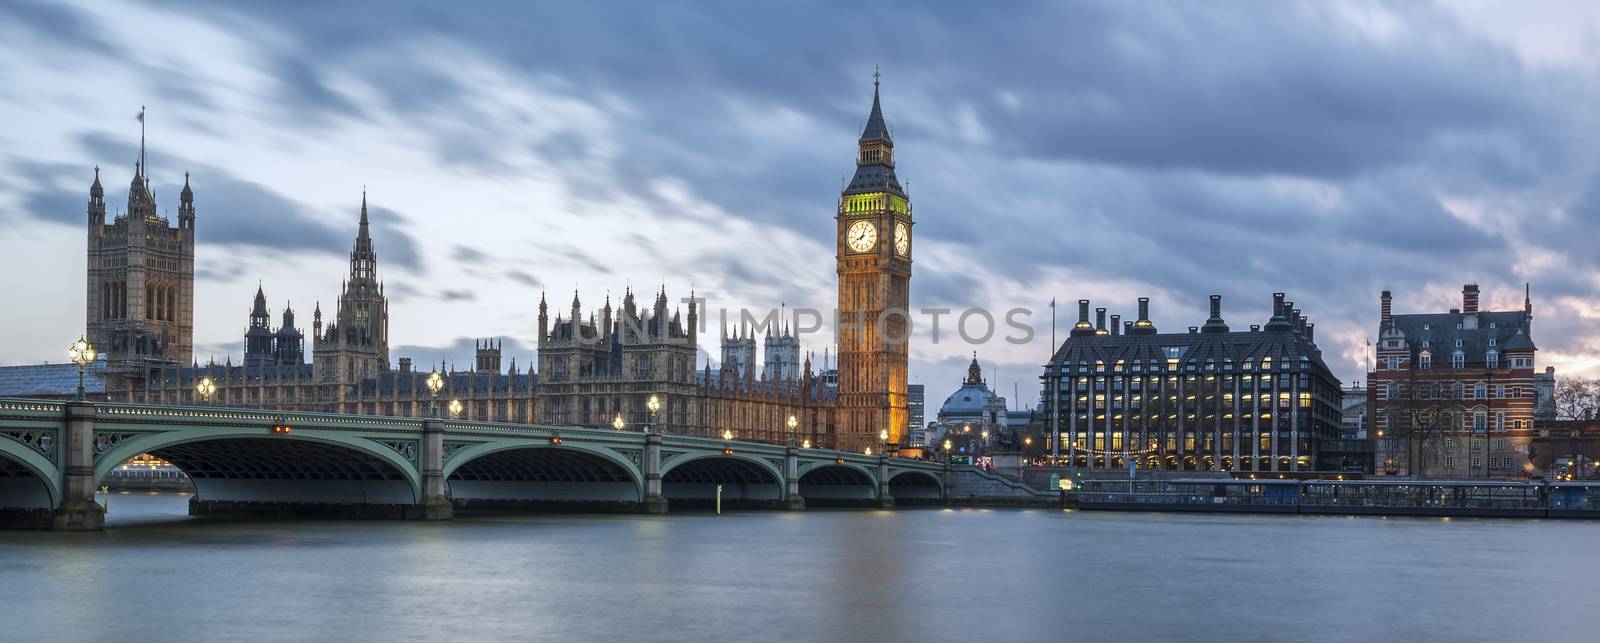 Big Ben and House of Parliament at Night, London, panoramic view.